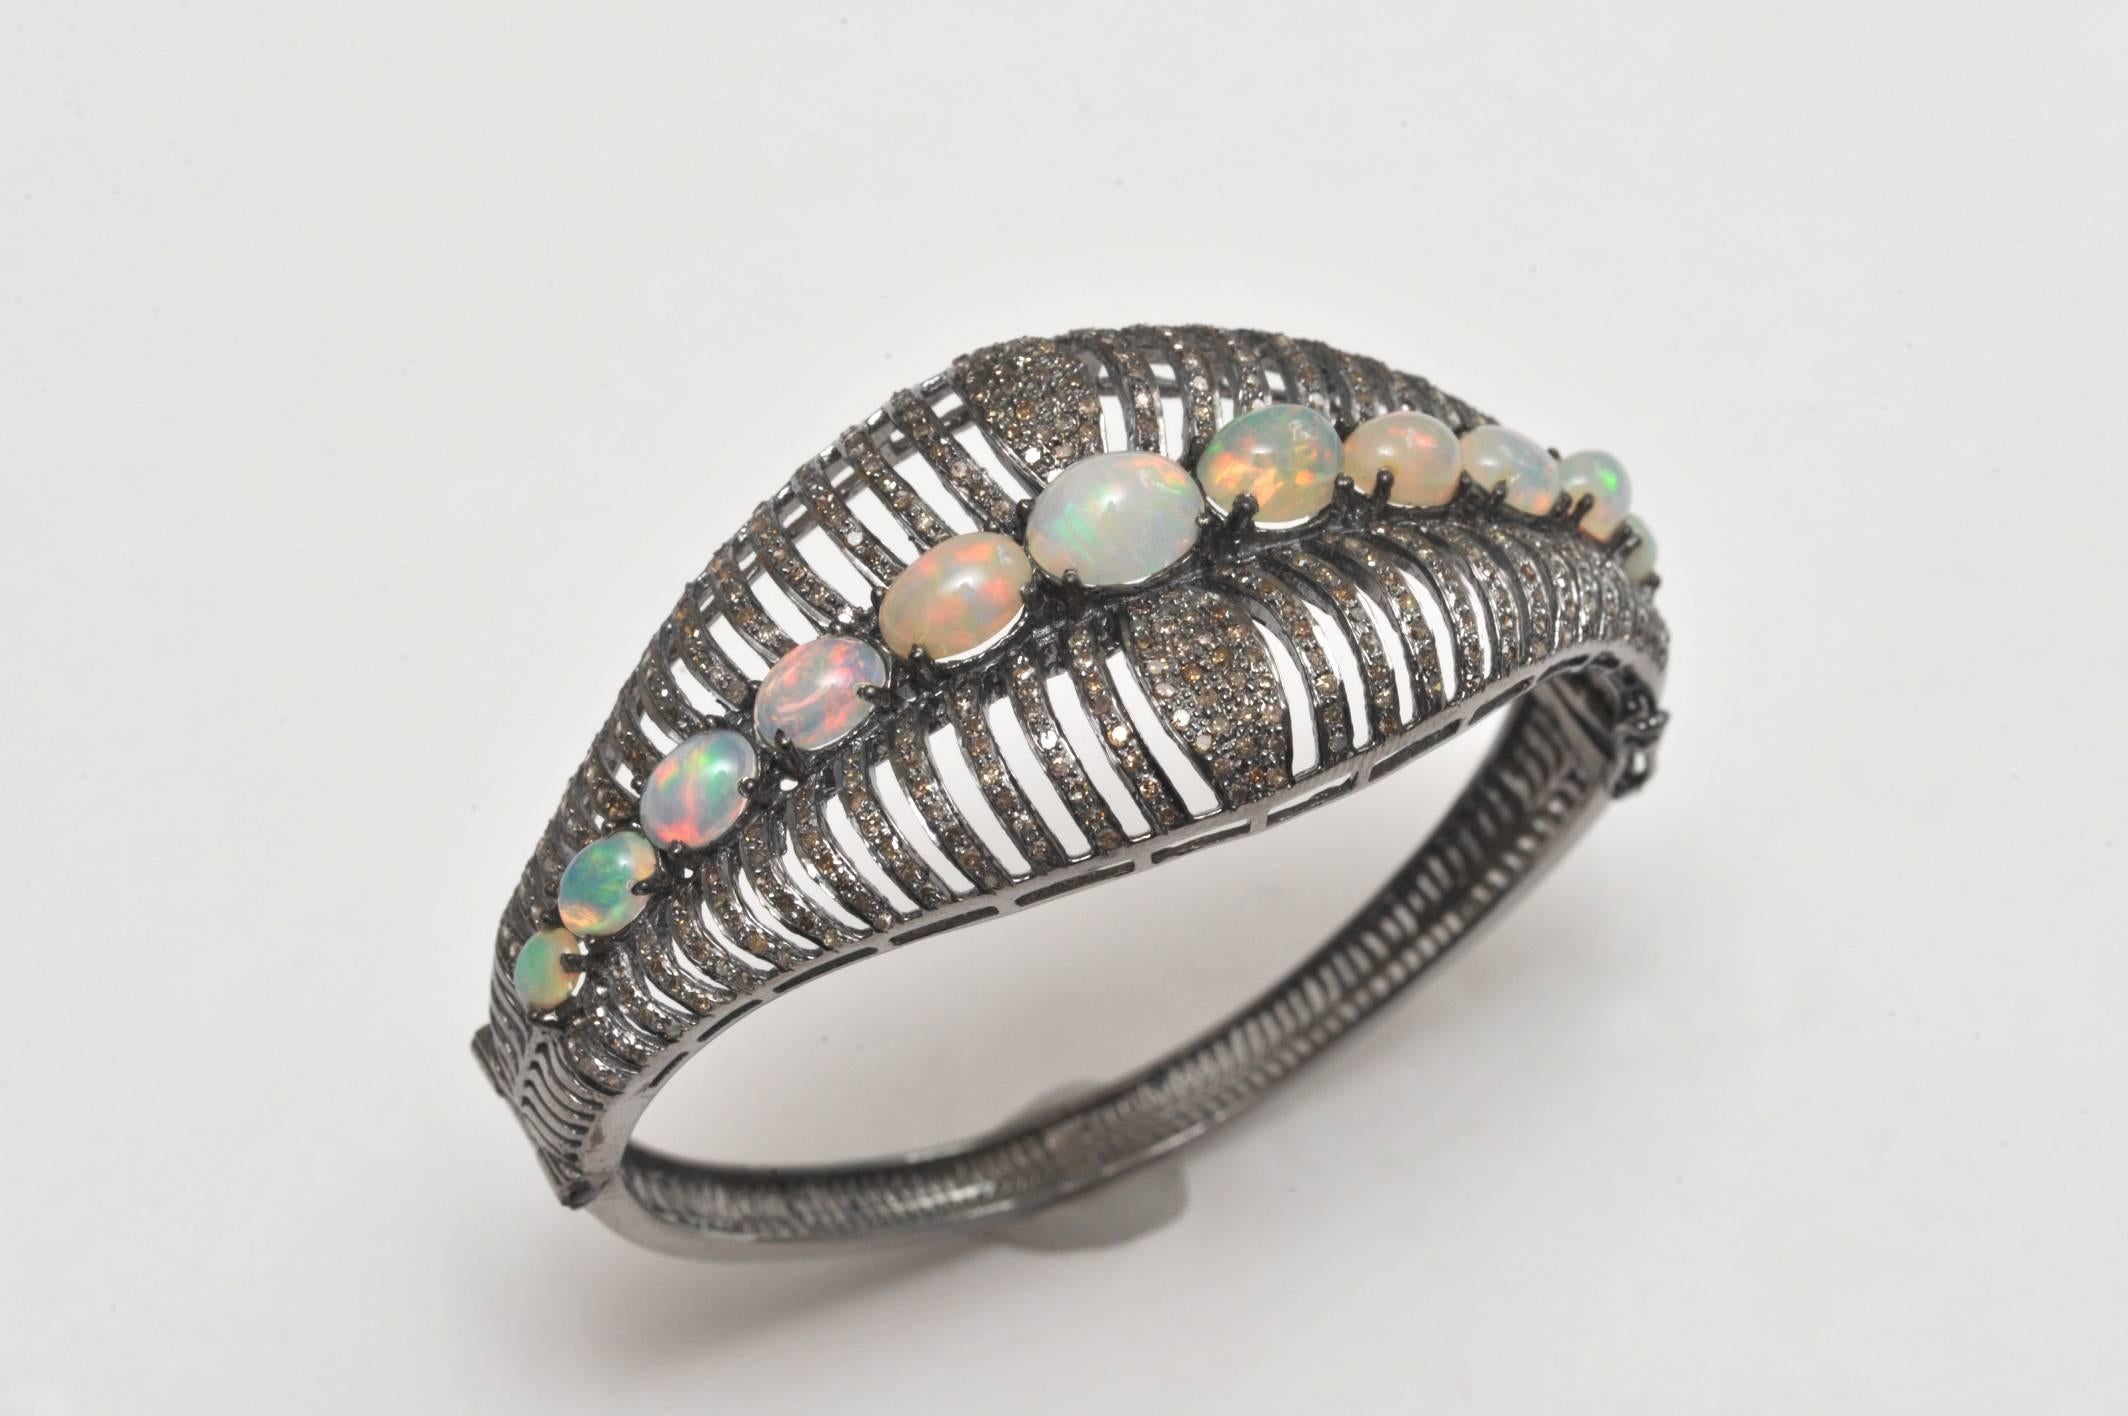 Incredibly fiery opals among pave`set diamonds in an oxidized sterling bracelet.    Oval shape keeps the stones on top of the wrist.  Push clasp with two side safeties.  Inside circumference is 6.5